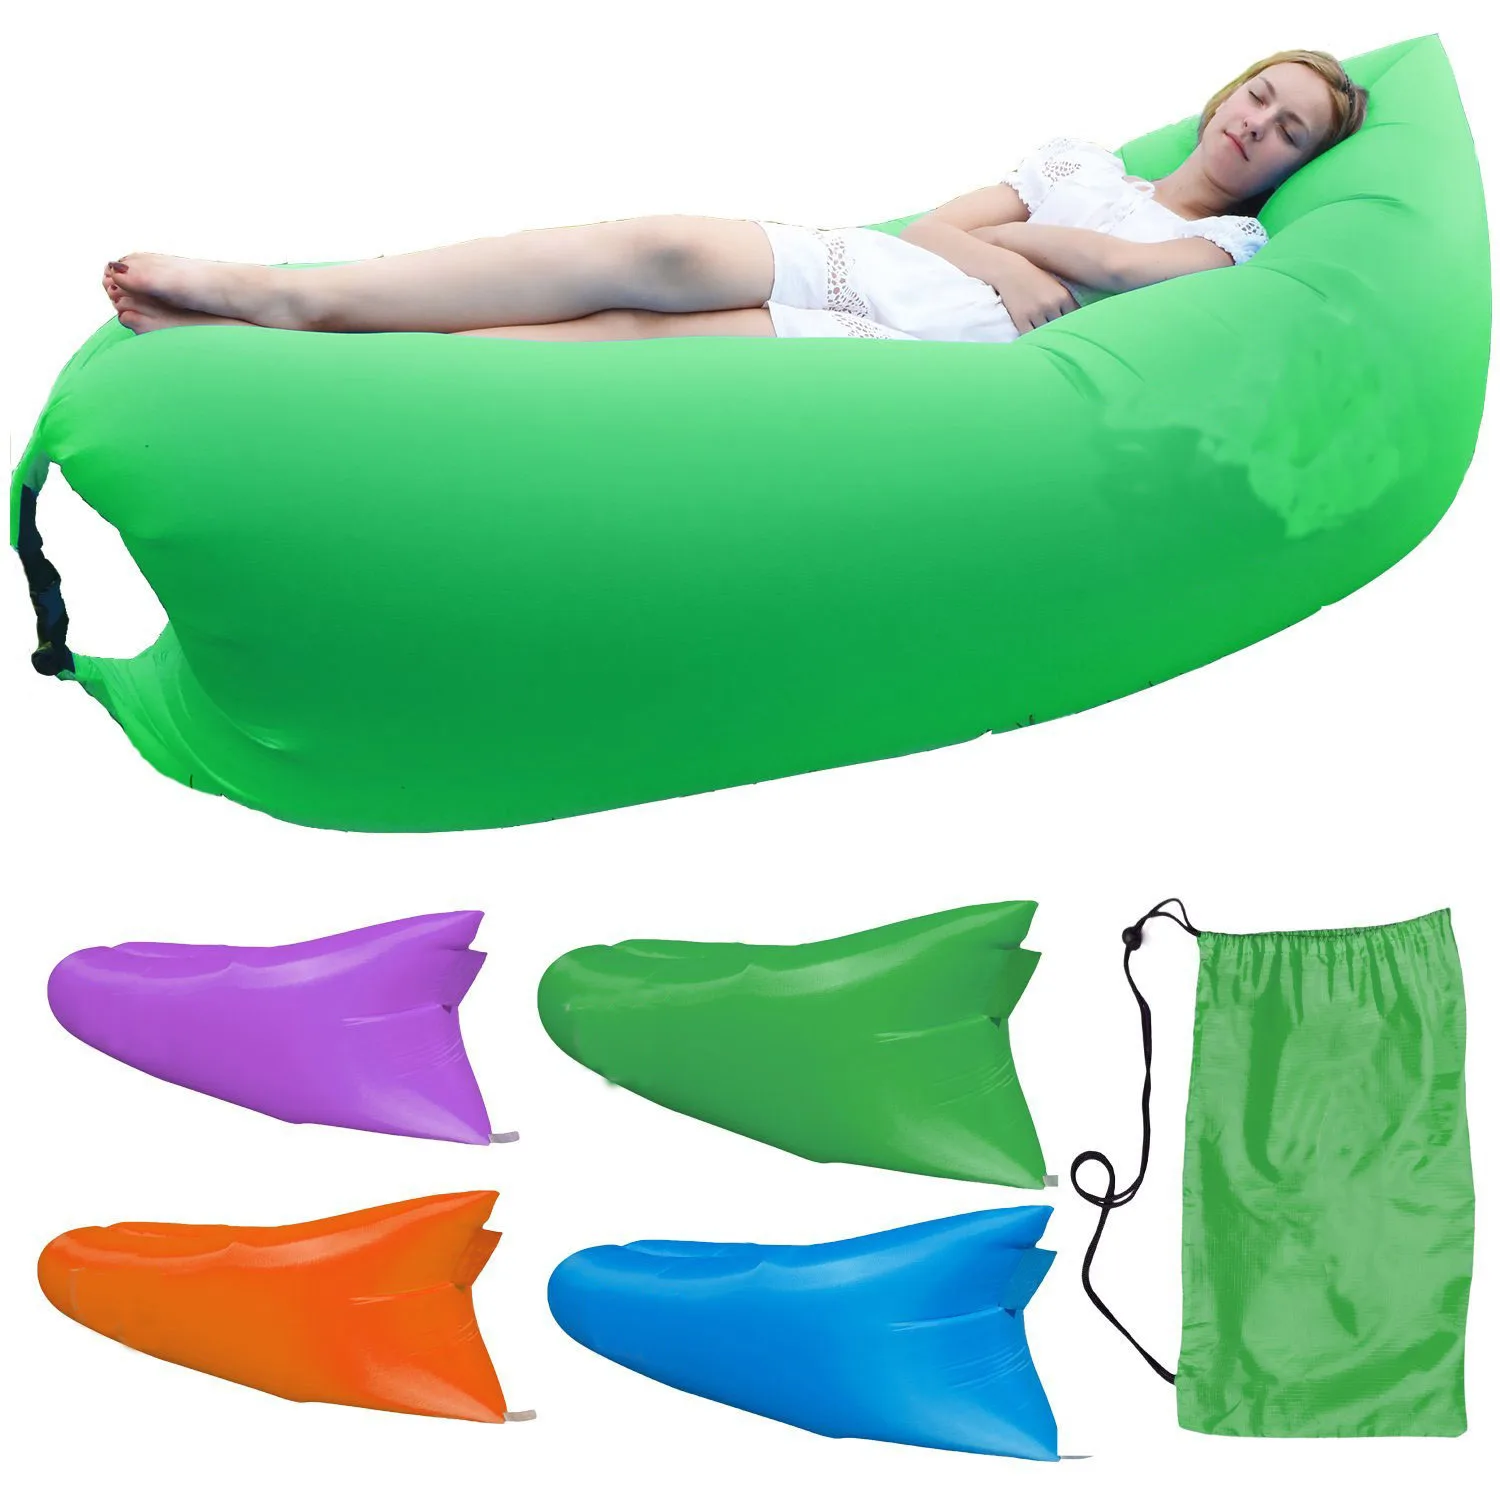 

Outdoor Inflatable Cushion Adults Kids Air Sofa Bed Lounger Couch Chair Bag Picnic Beach Lazy Camping Mat Portable Indoor Sofa